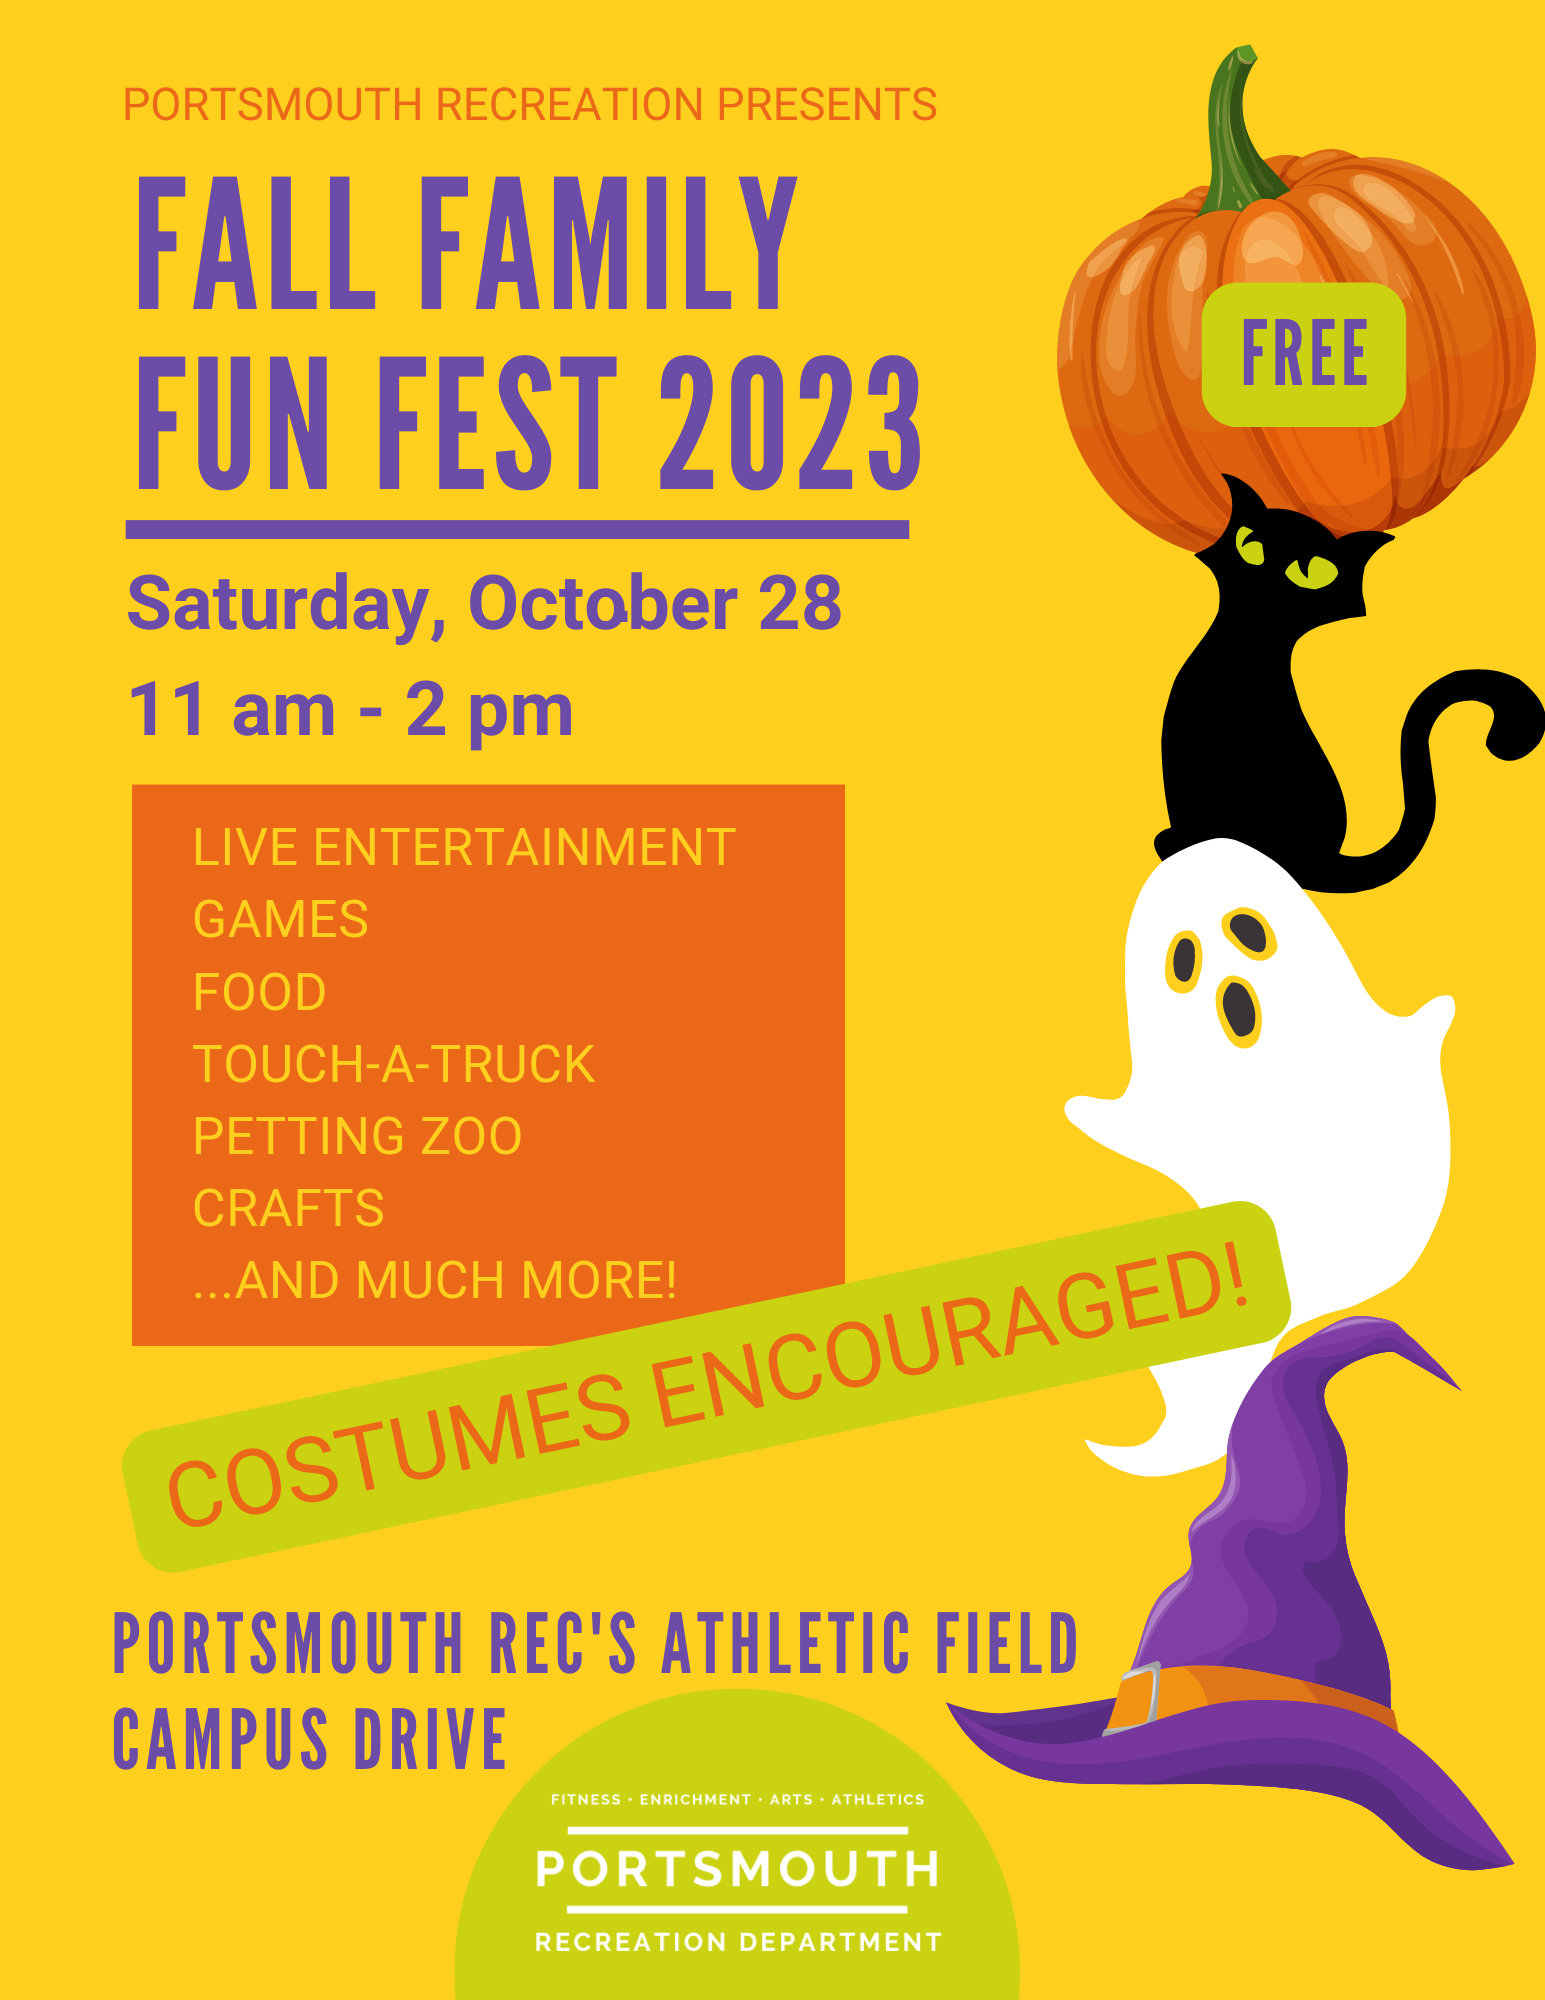 Fall family fun fest 2023 Community Campus Recreation Fields October 28 from 9-12 ghost, witches hat, pumpkin, black cat. Portsmouth Recreation Department.